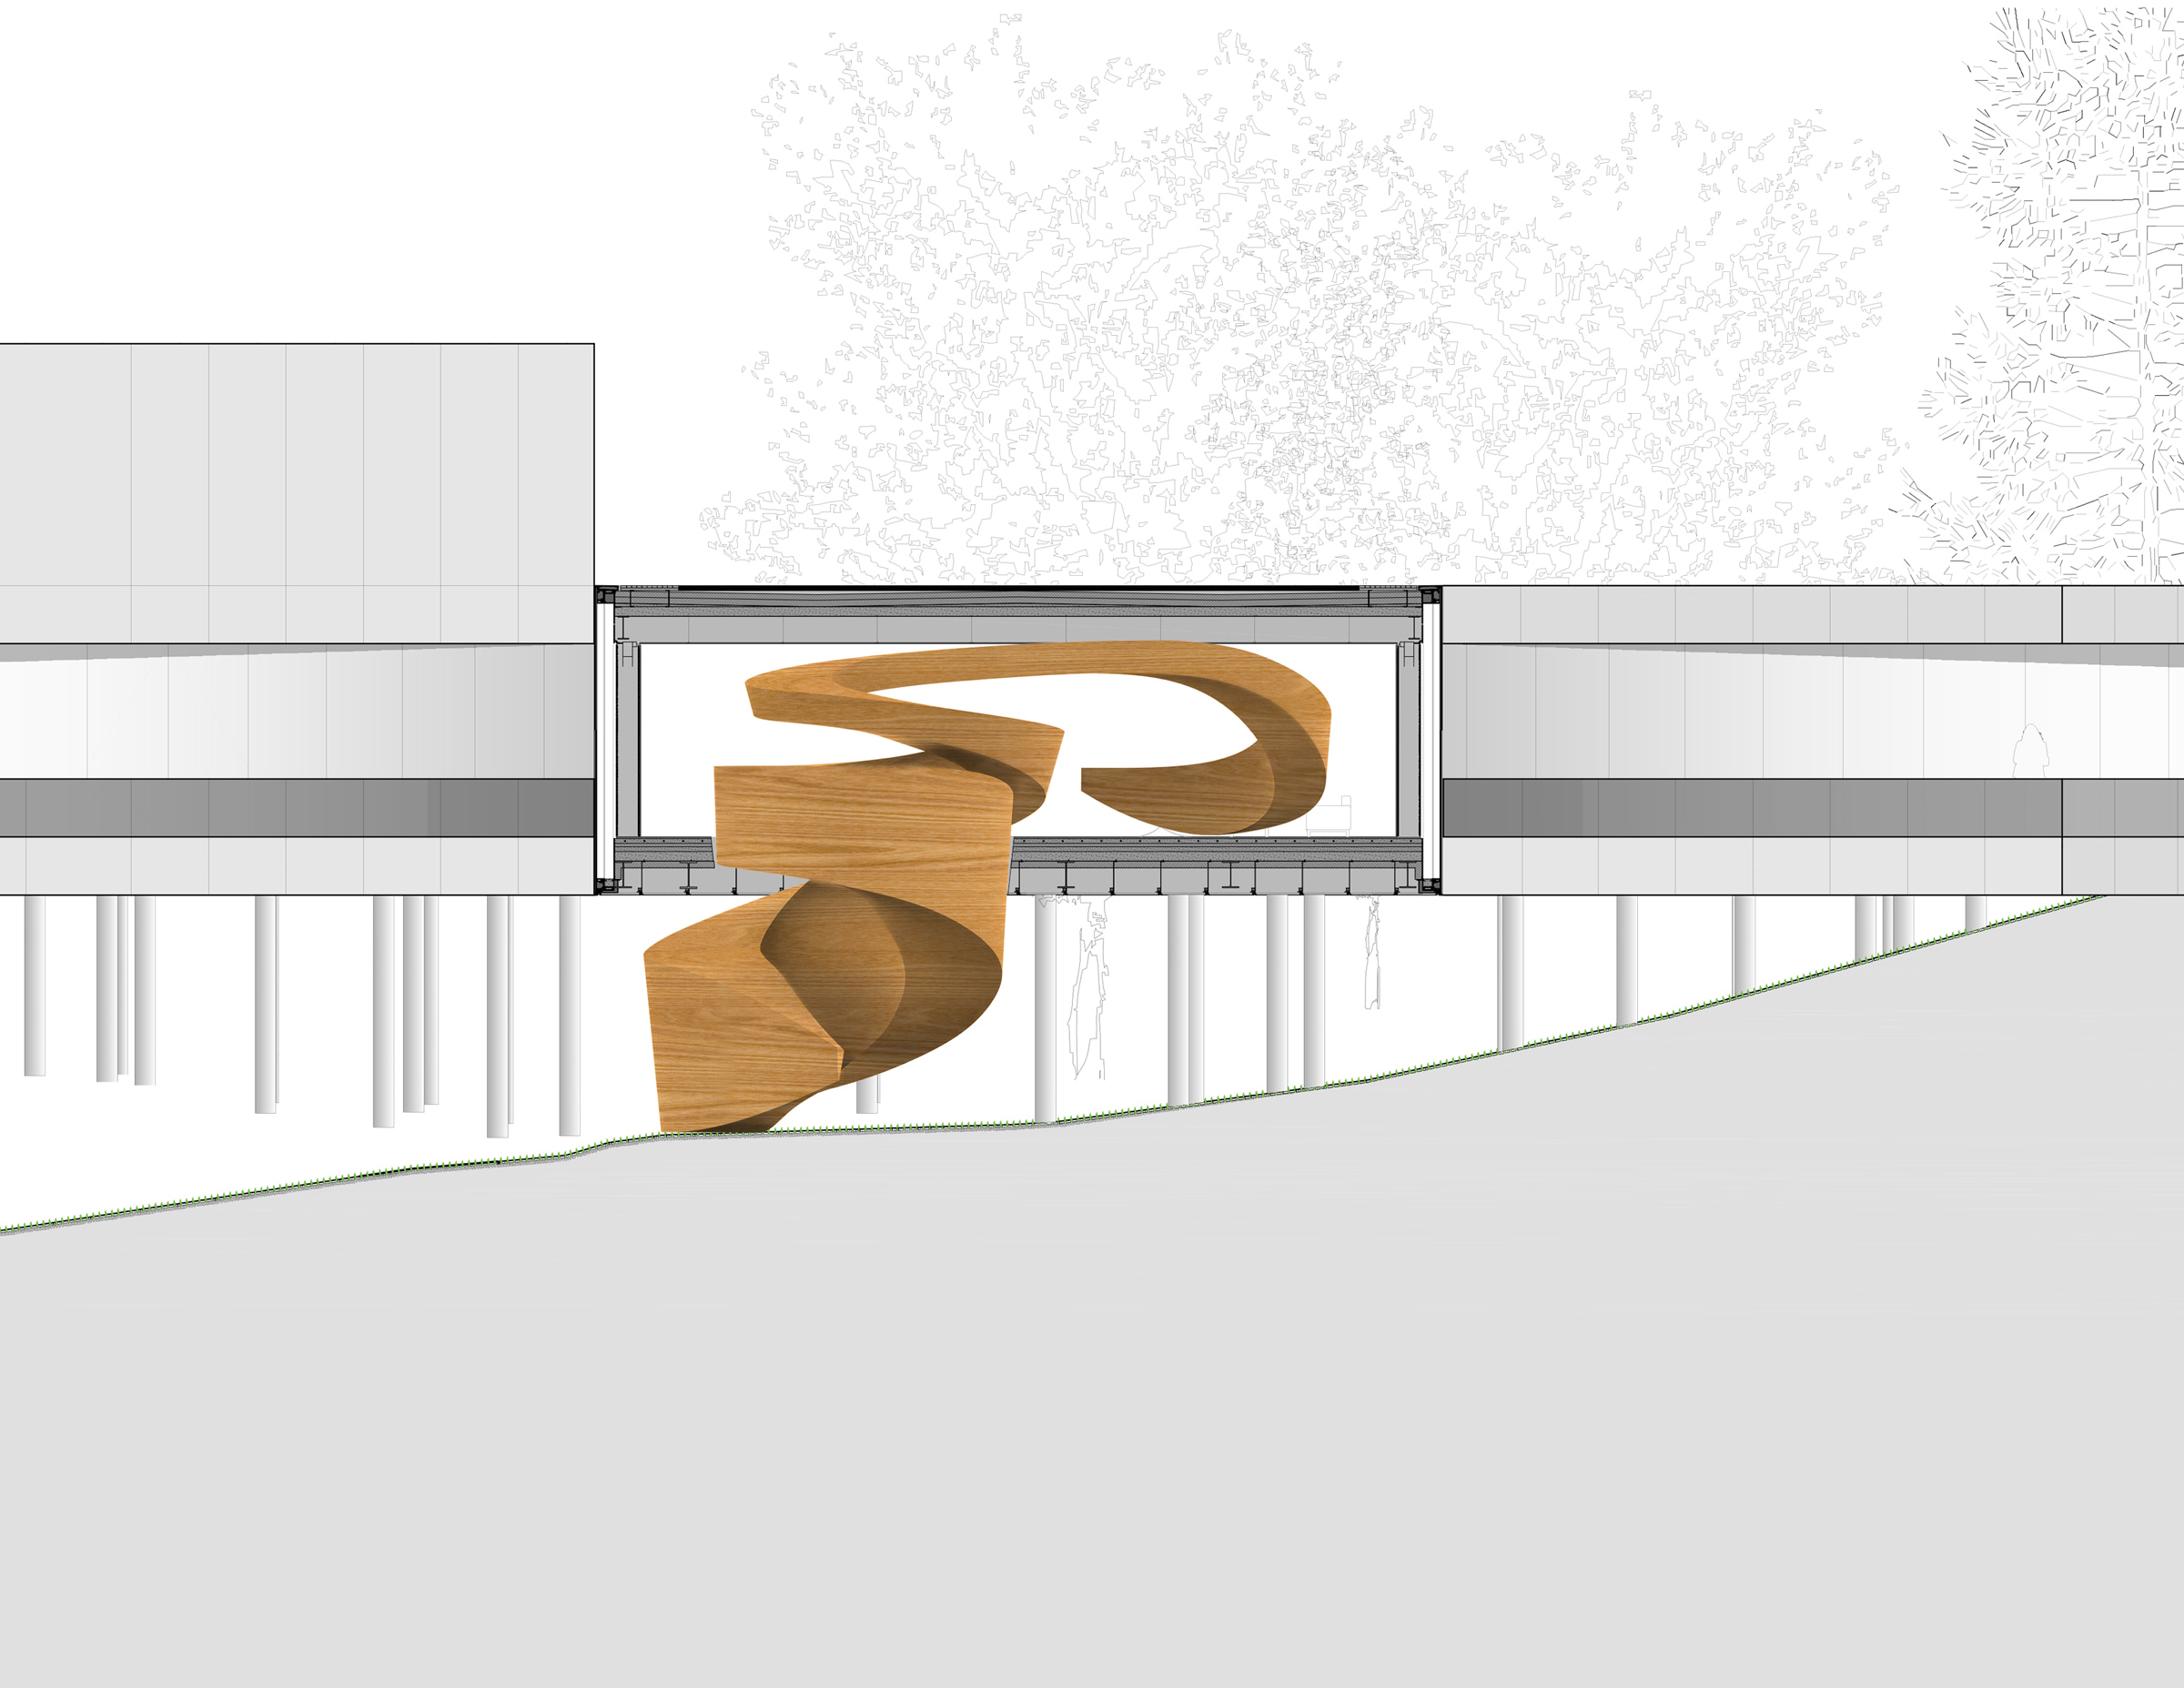 A section showing the Necklace Residence sculptural stair.